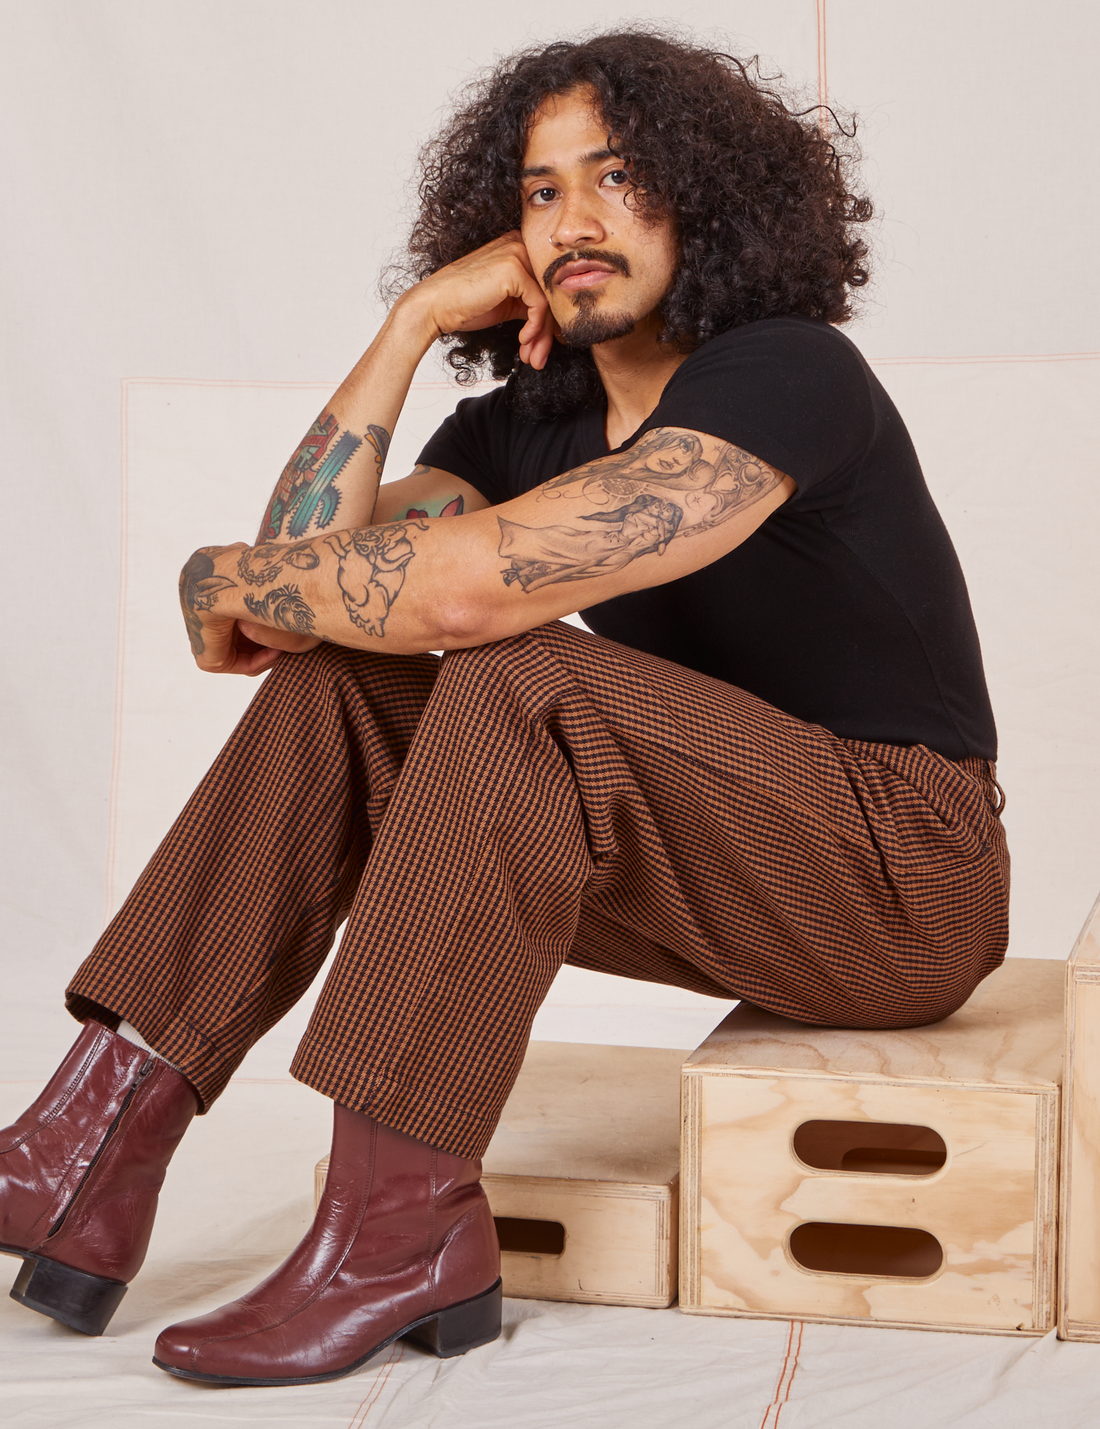 Jesse is sitting on a wooden crate. They are wearing Checker Trousers in Brown and black Baby Tee